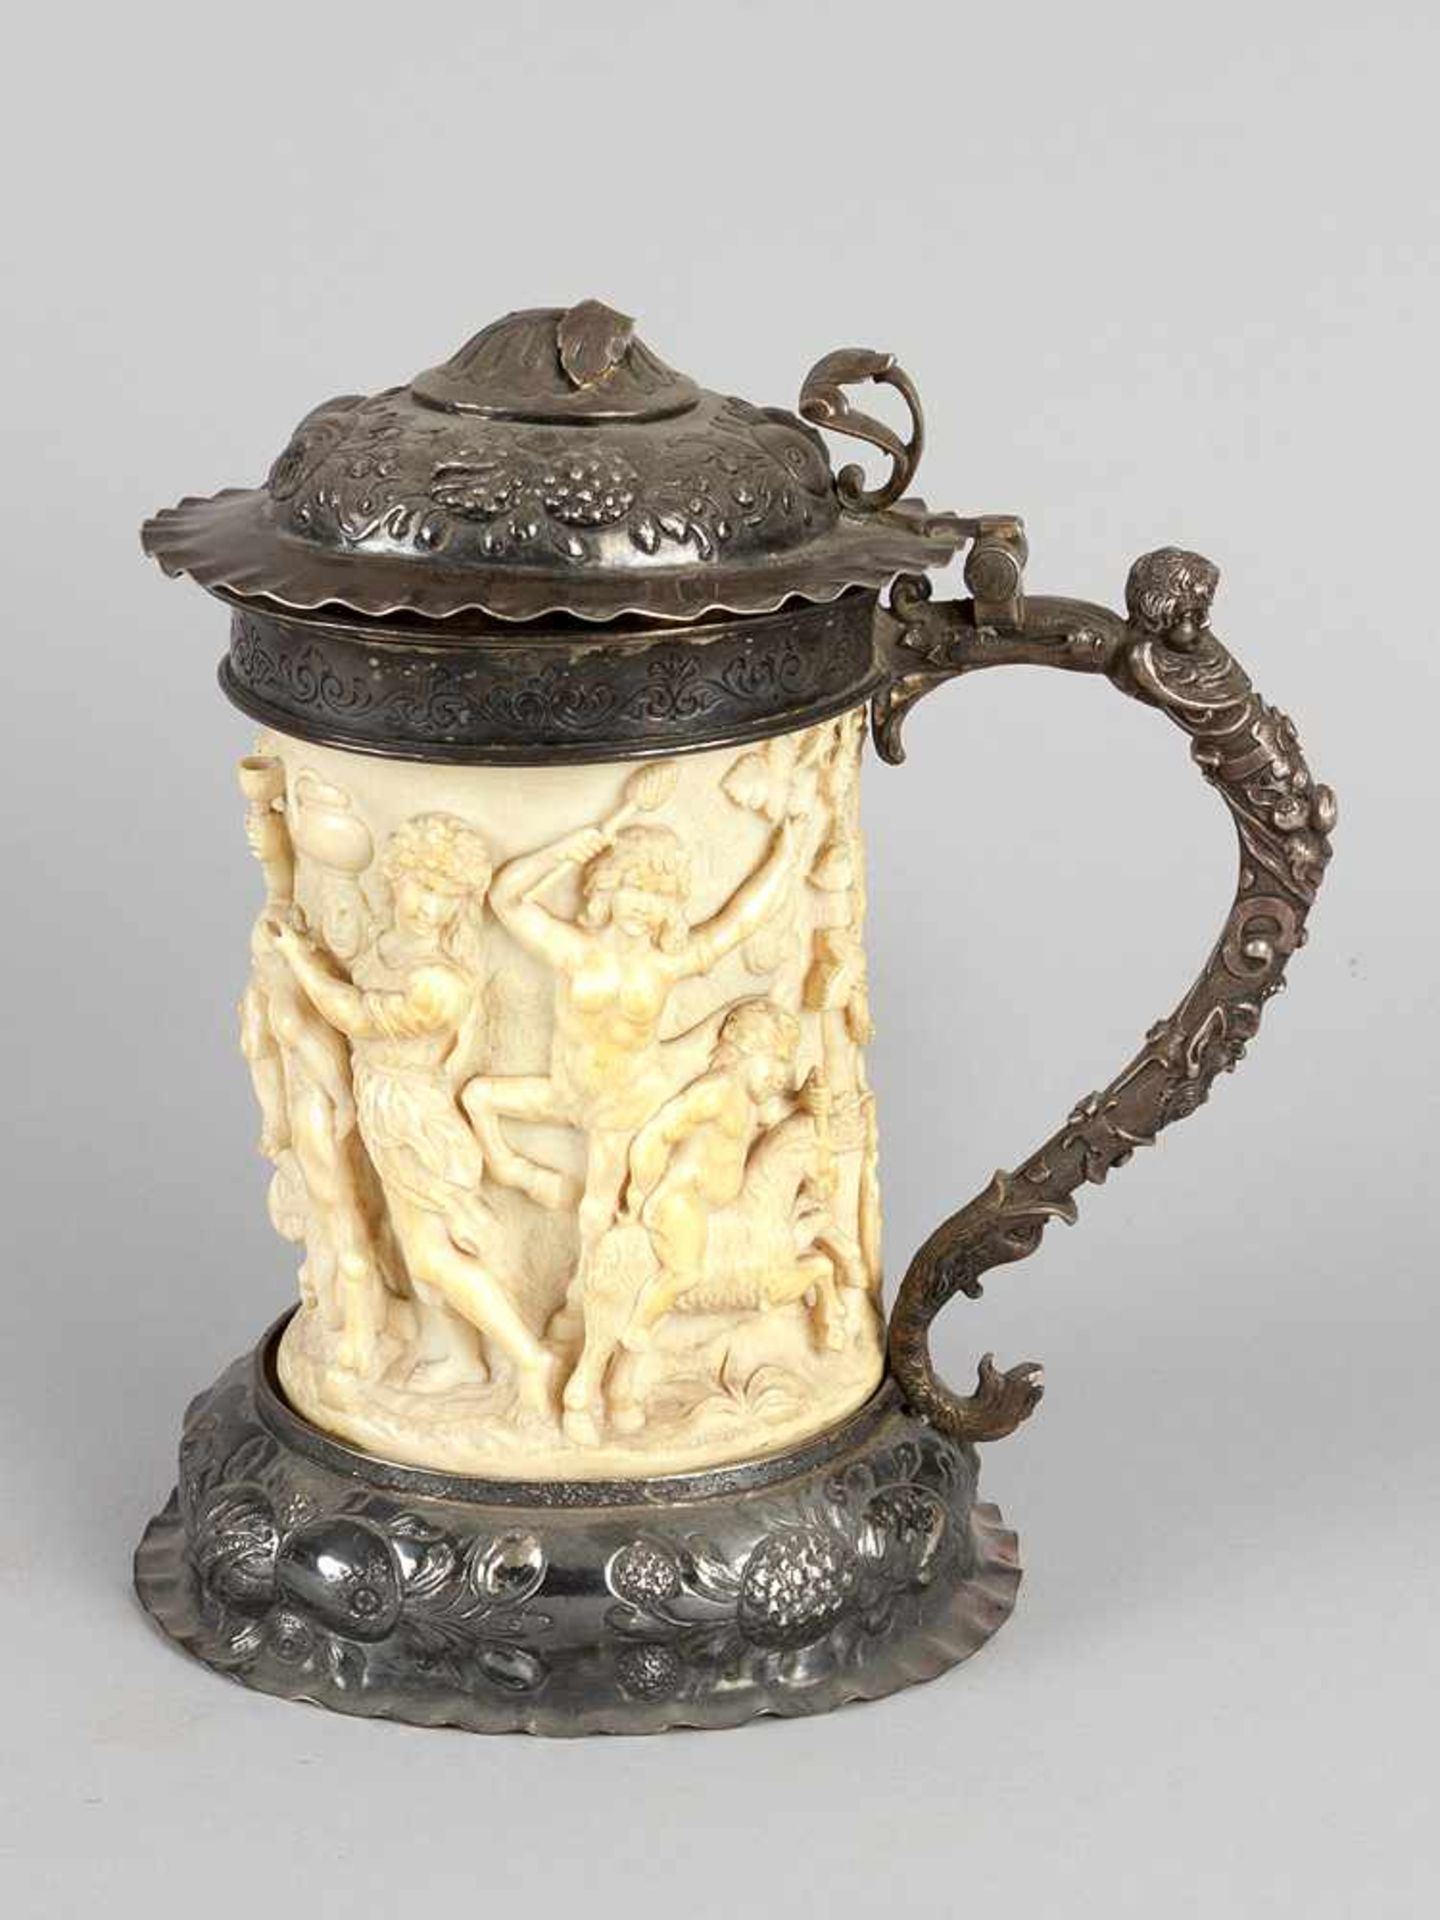 German tankard with silver mounted feed top lid and handgrip, chased and engraved with fruits,